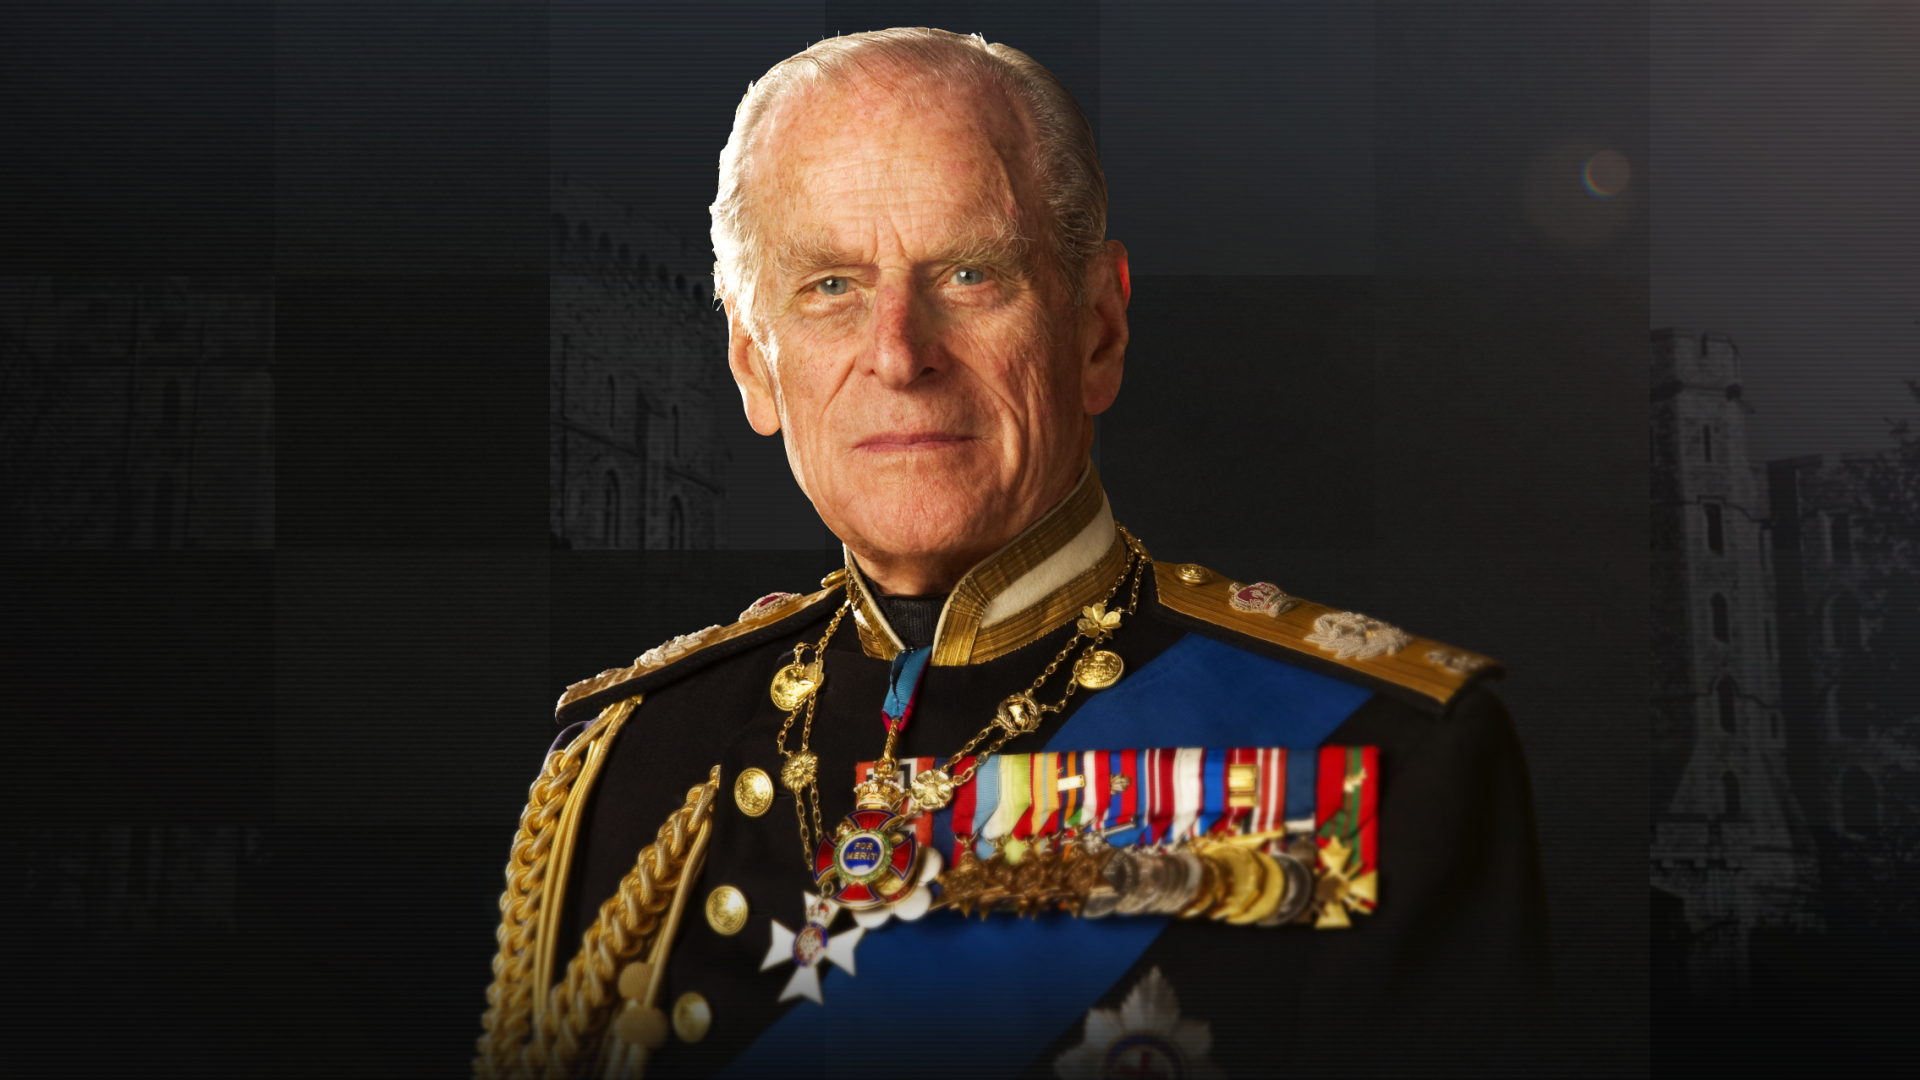 The award ward is likely to be judged Prince Philip’s greatest legacy.